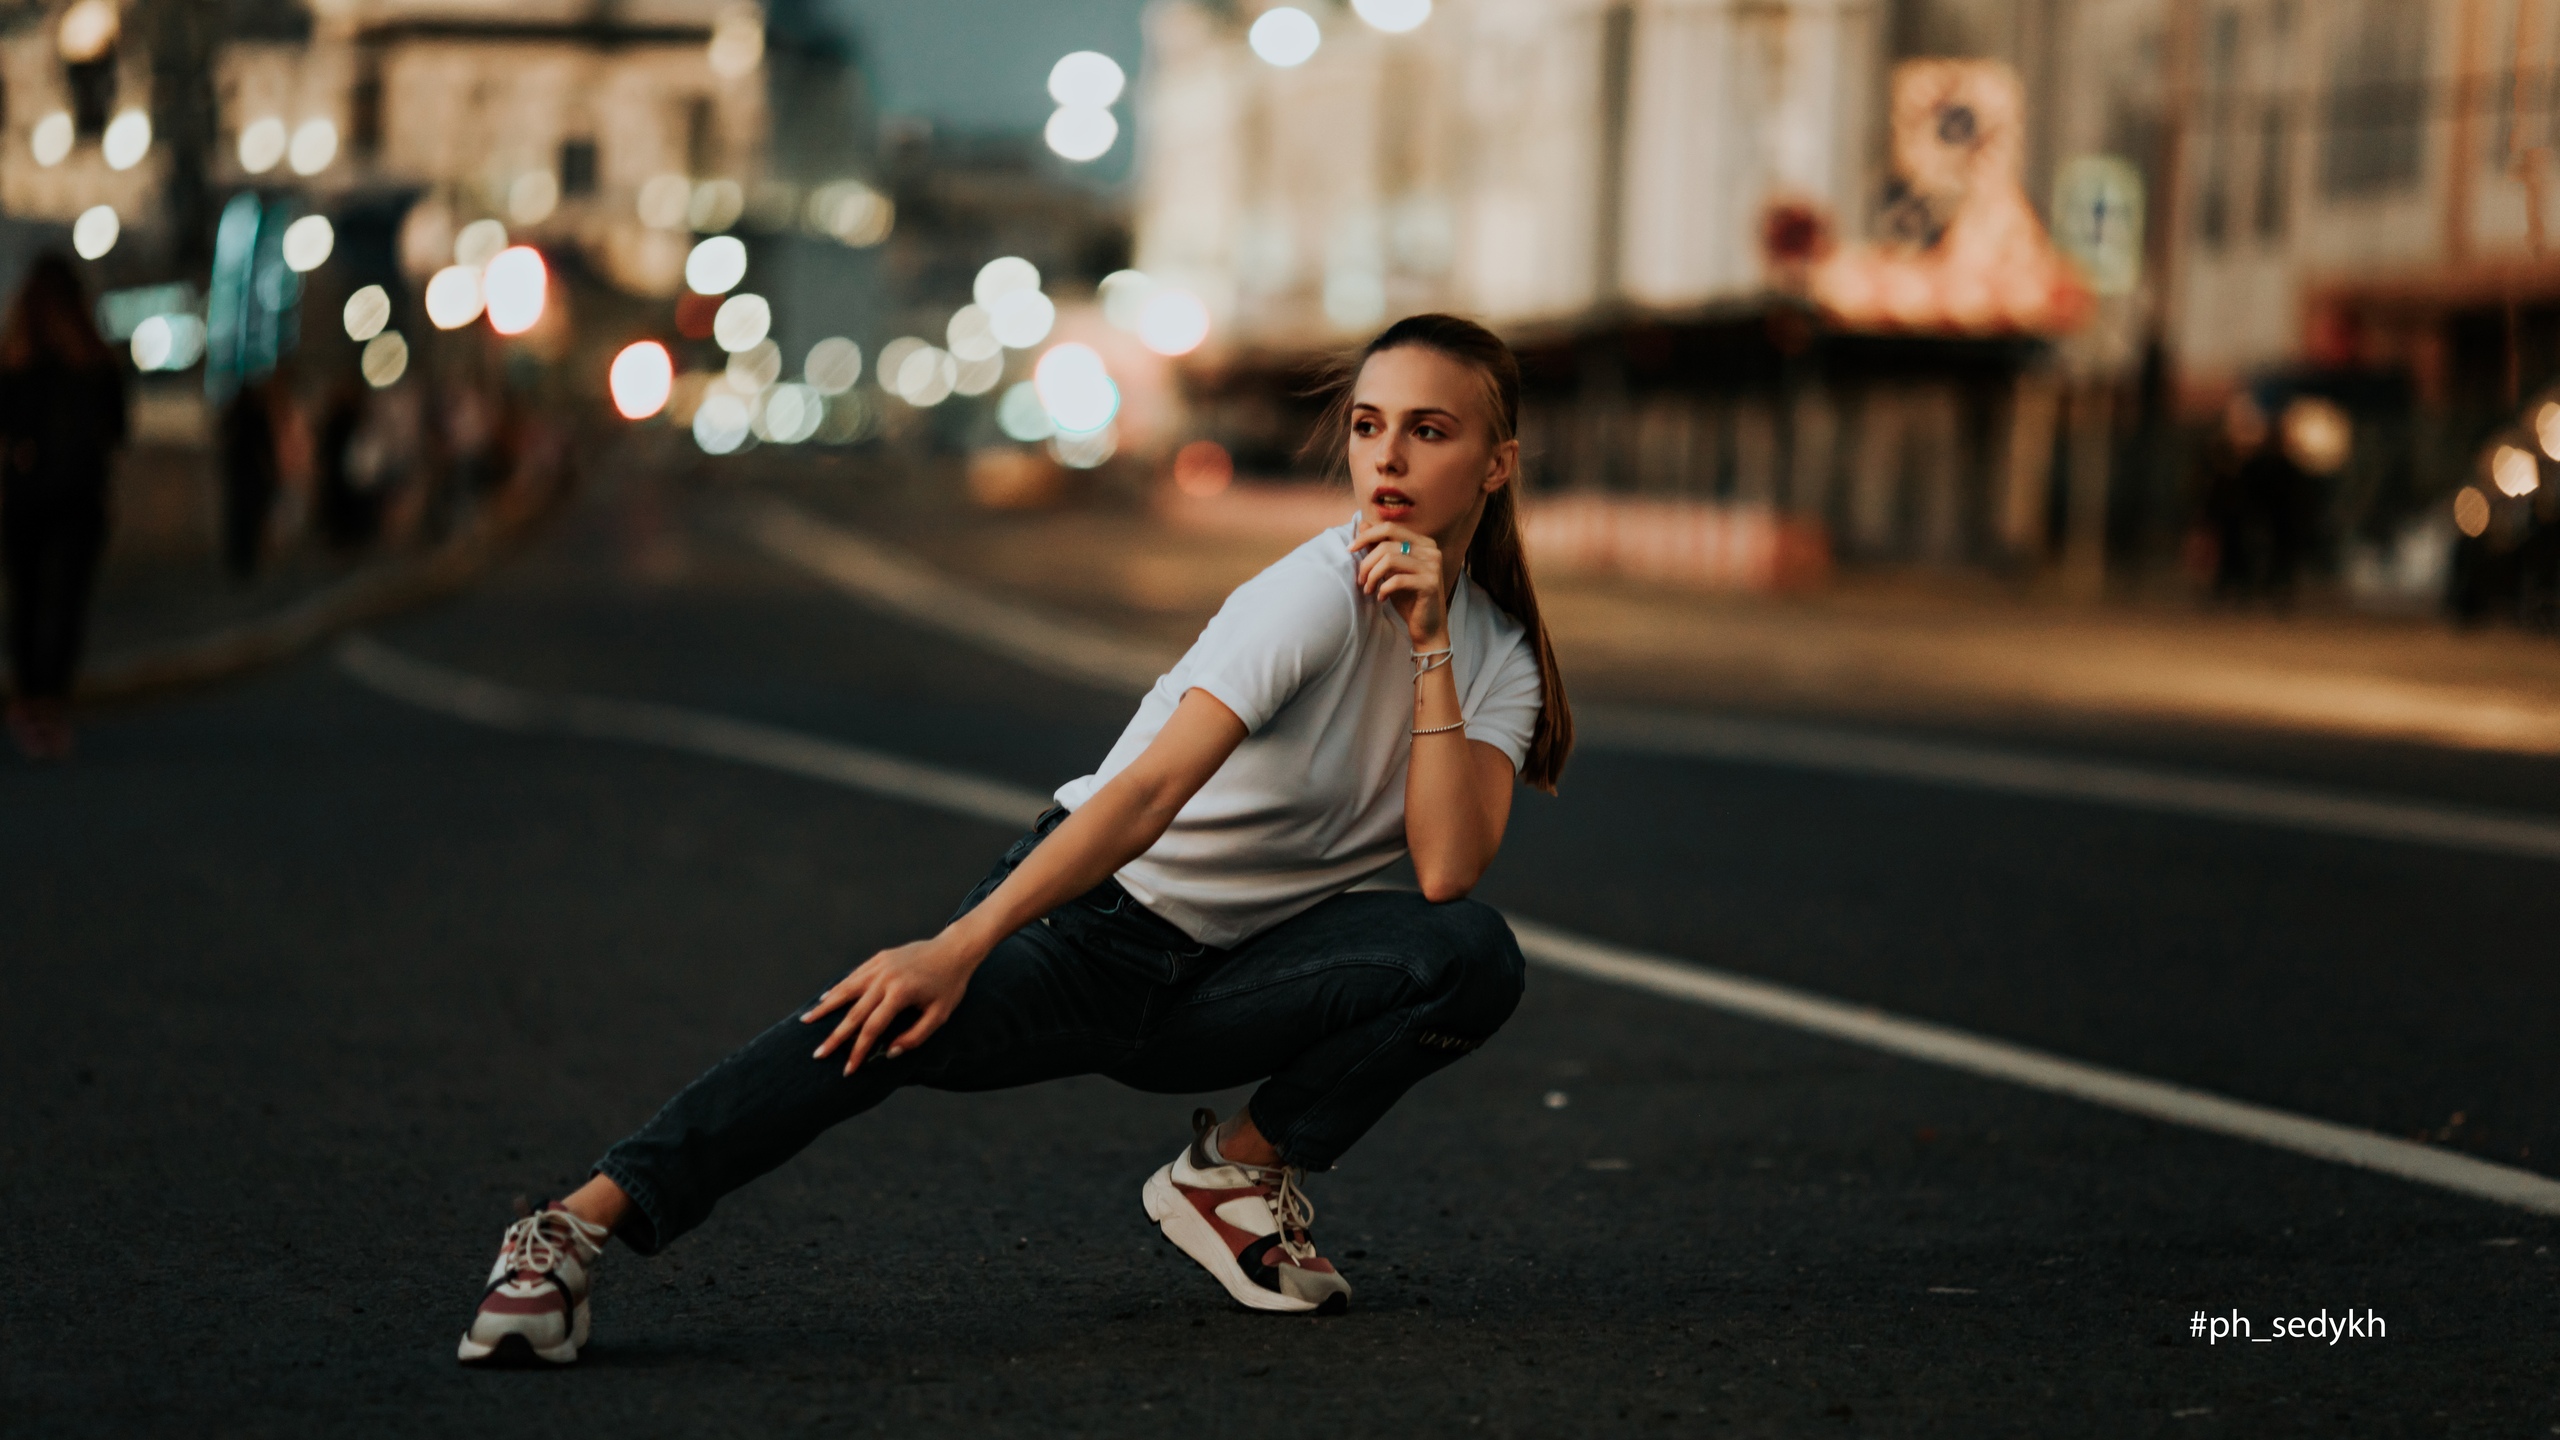 People 2560x1440 women brunette ponytail T-shirt jeans sneakers looking away touching face squatting street urban city lights outdoors women outdoors Dmitry Sedykh watermarked